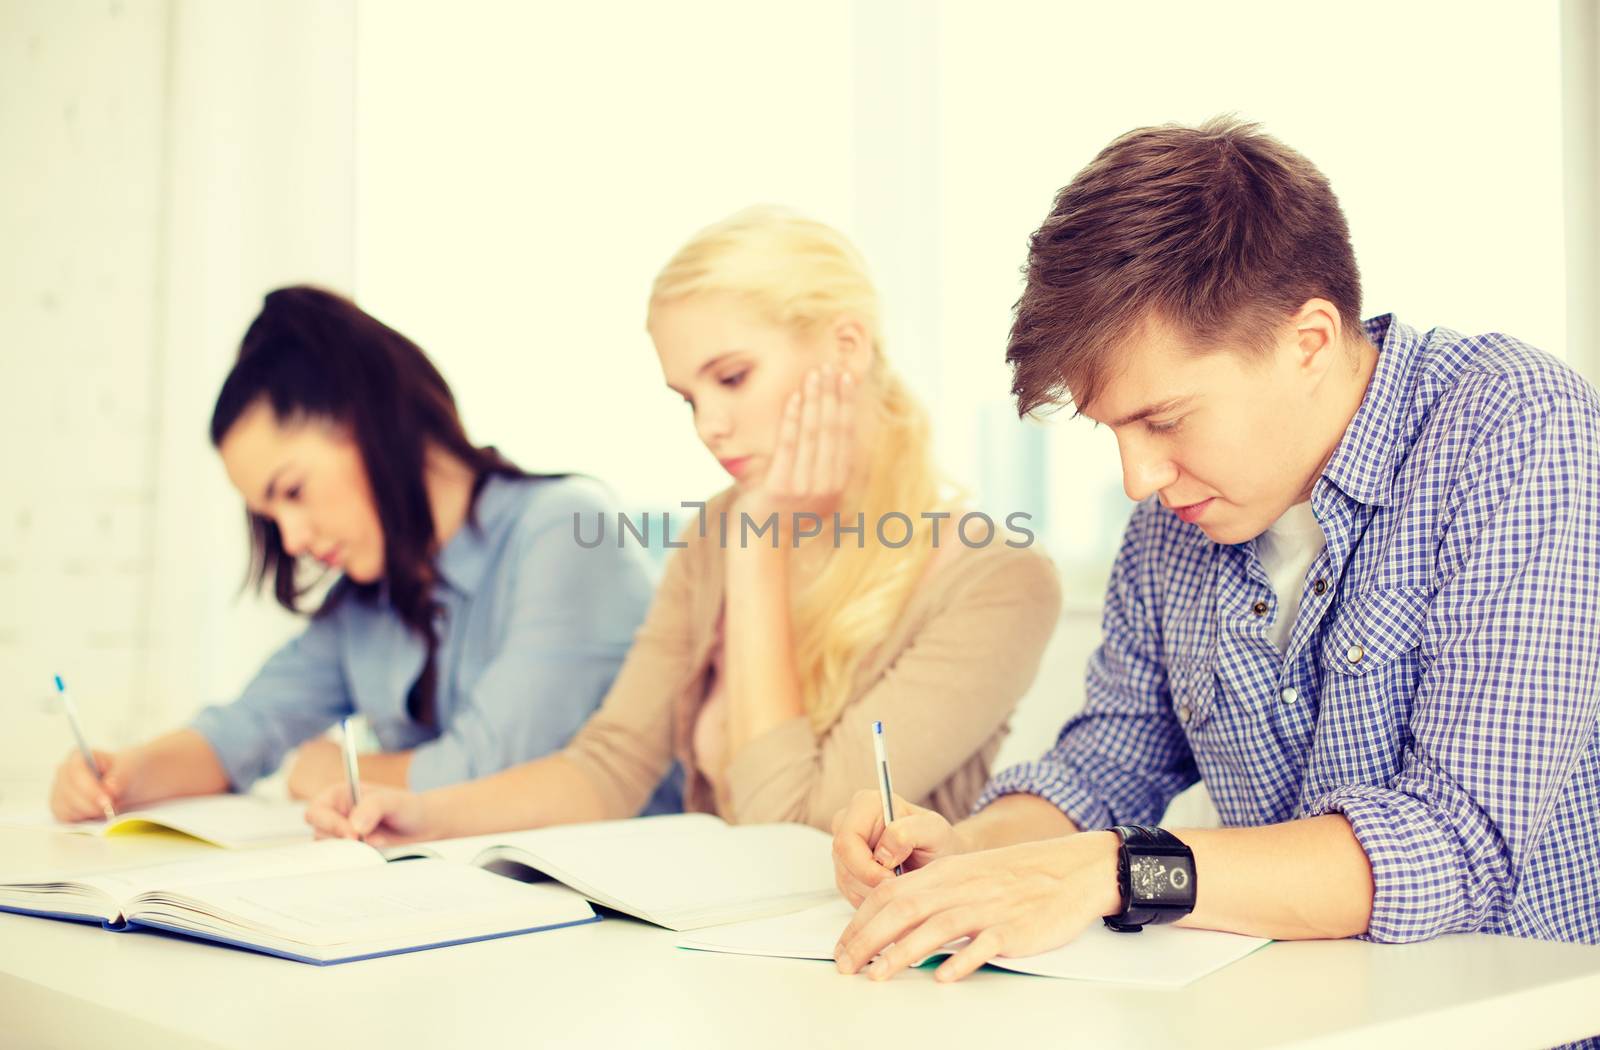 school and education concept - group of tired students with notebooks at school